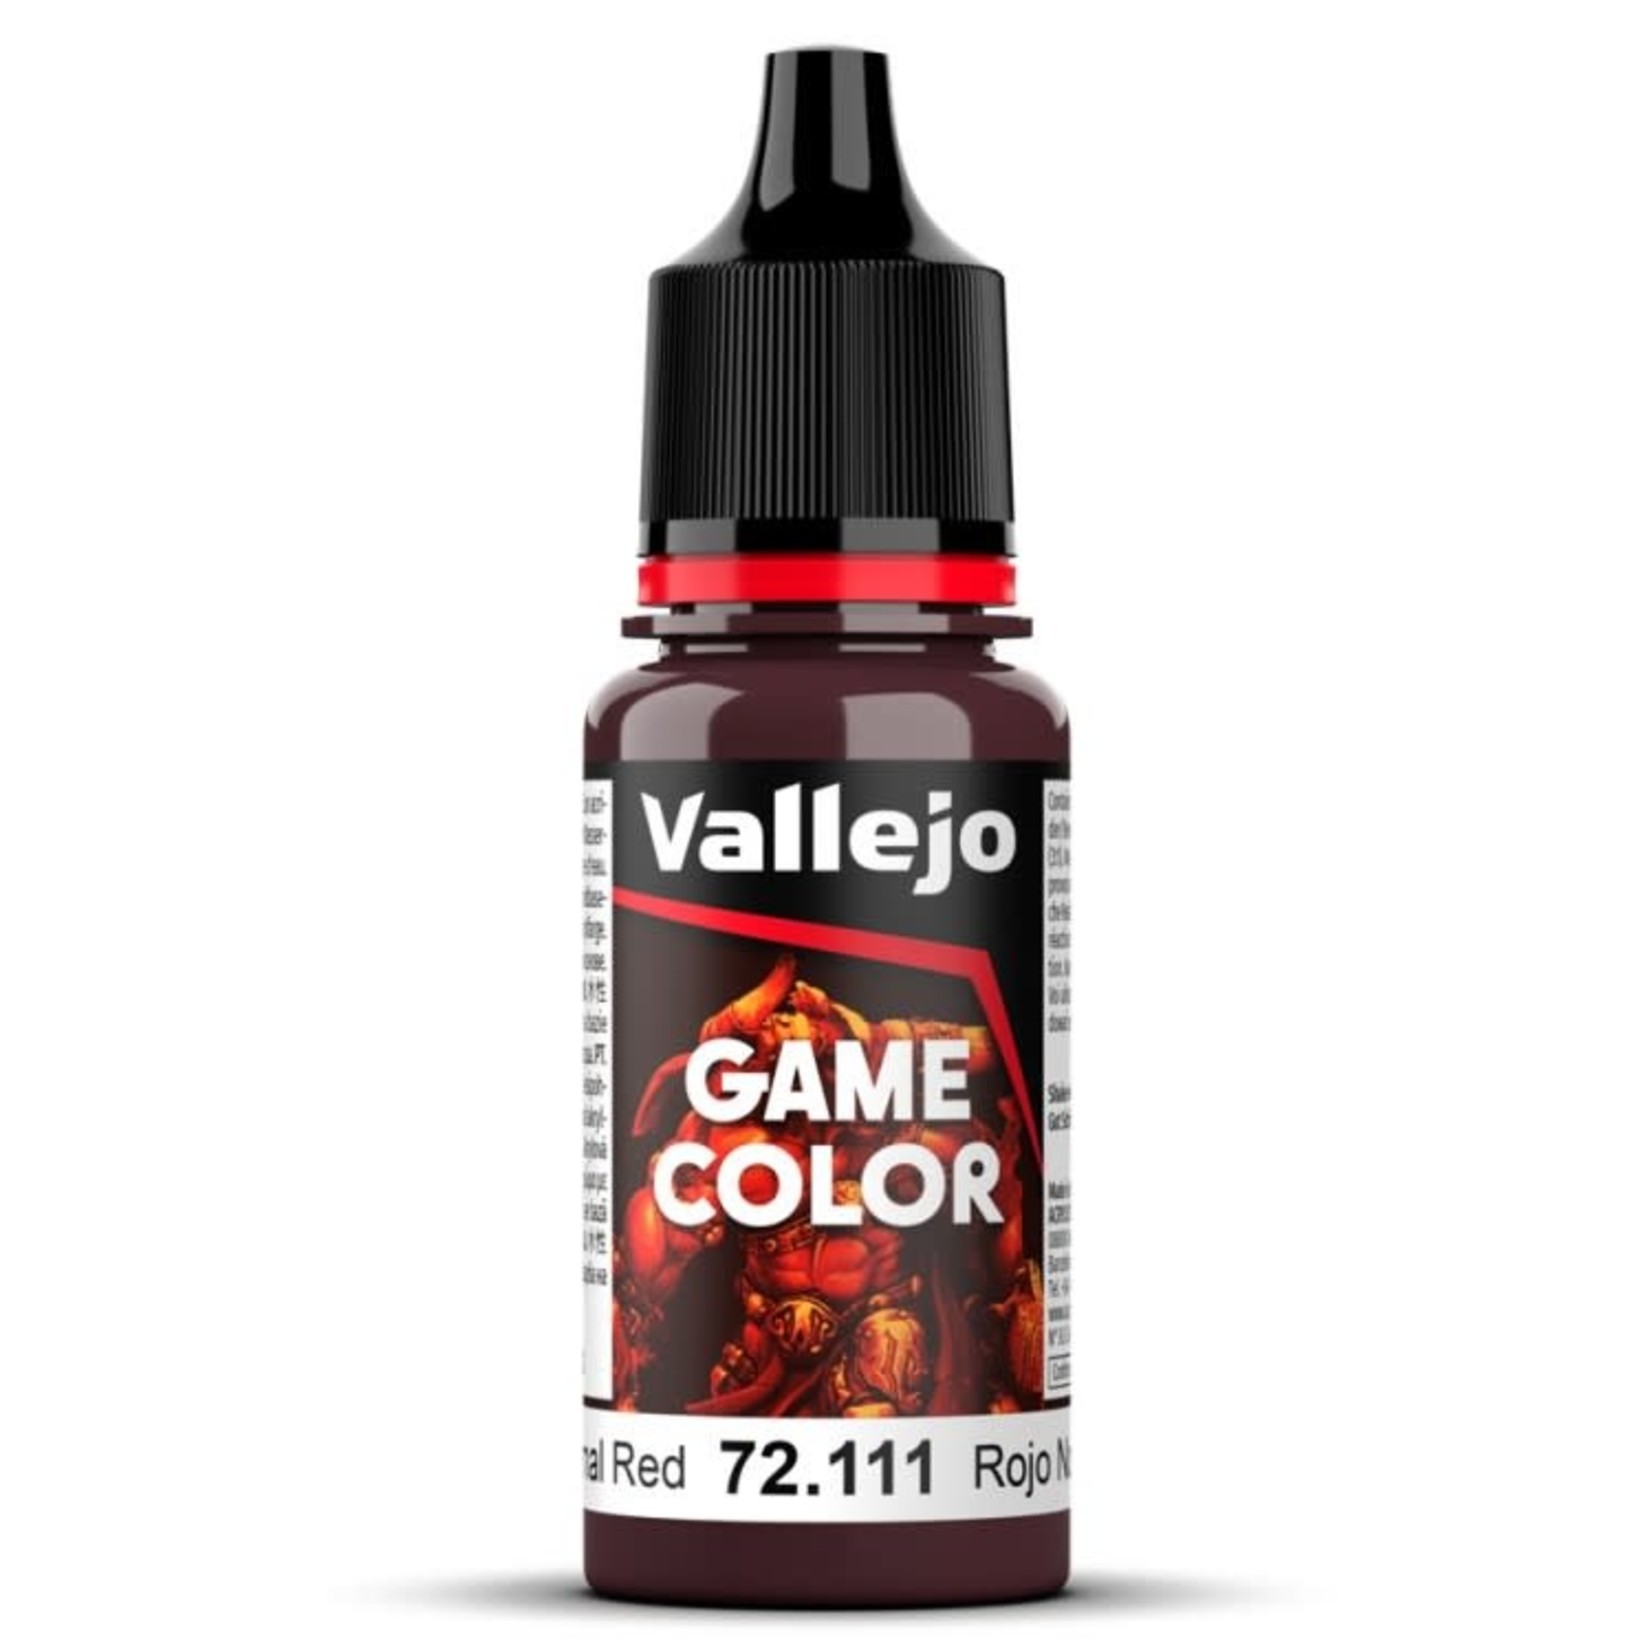 Vallejo Paint: Game Color (Nocturnal Red)